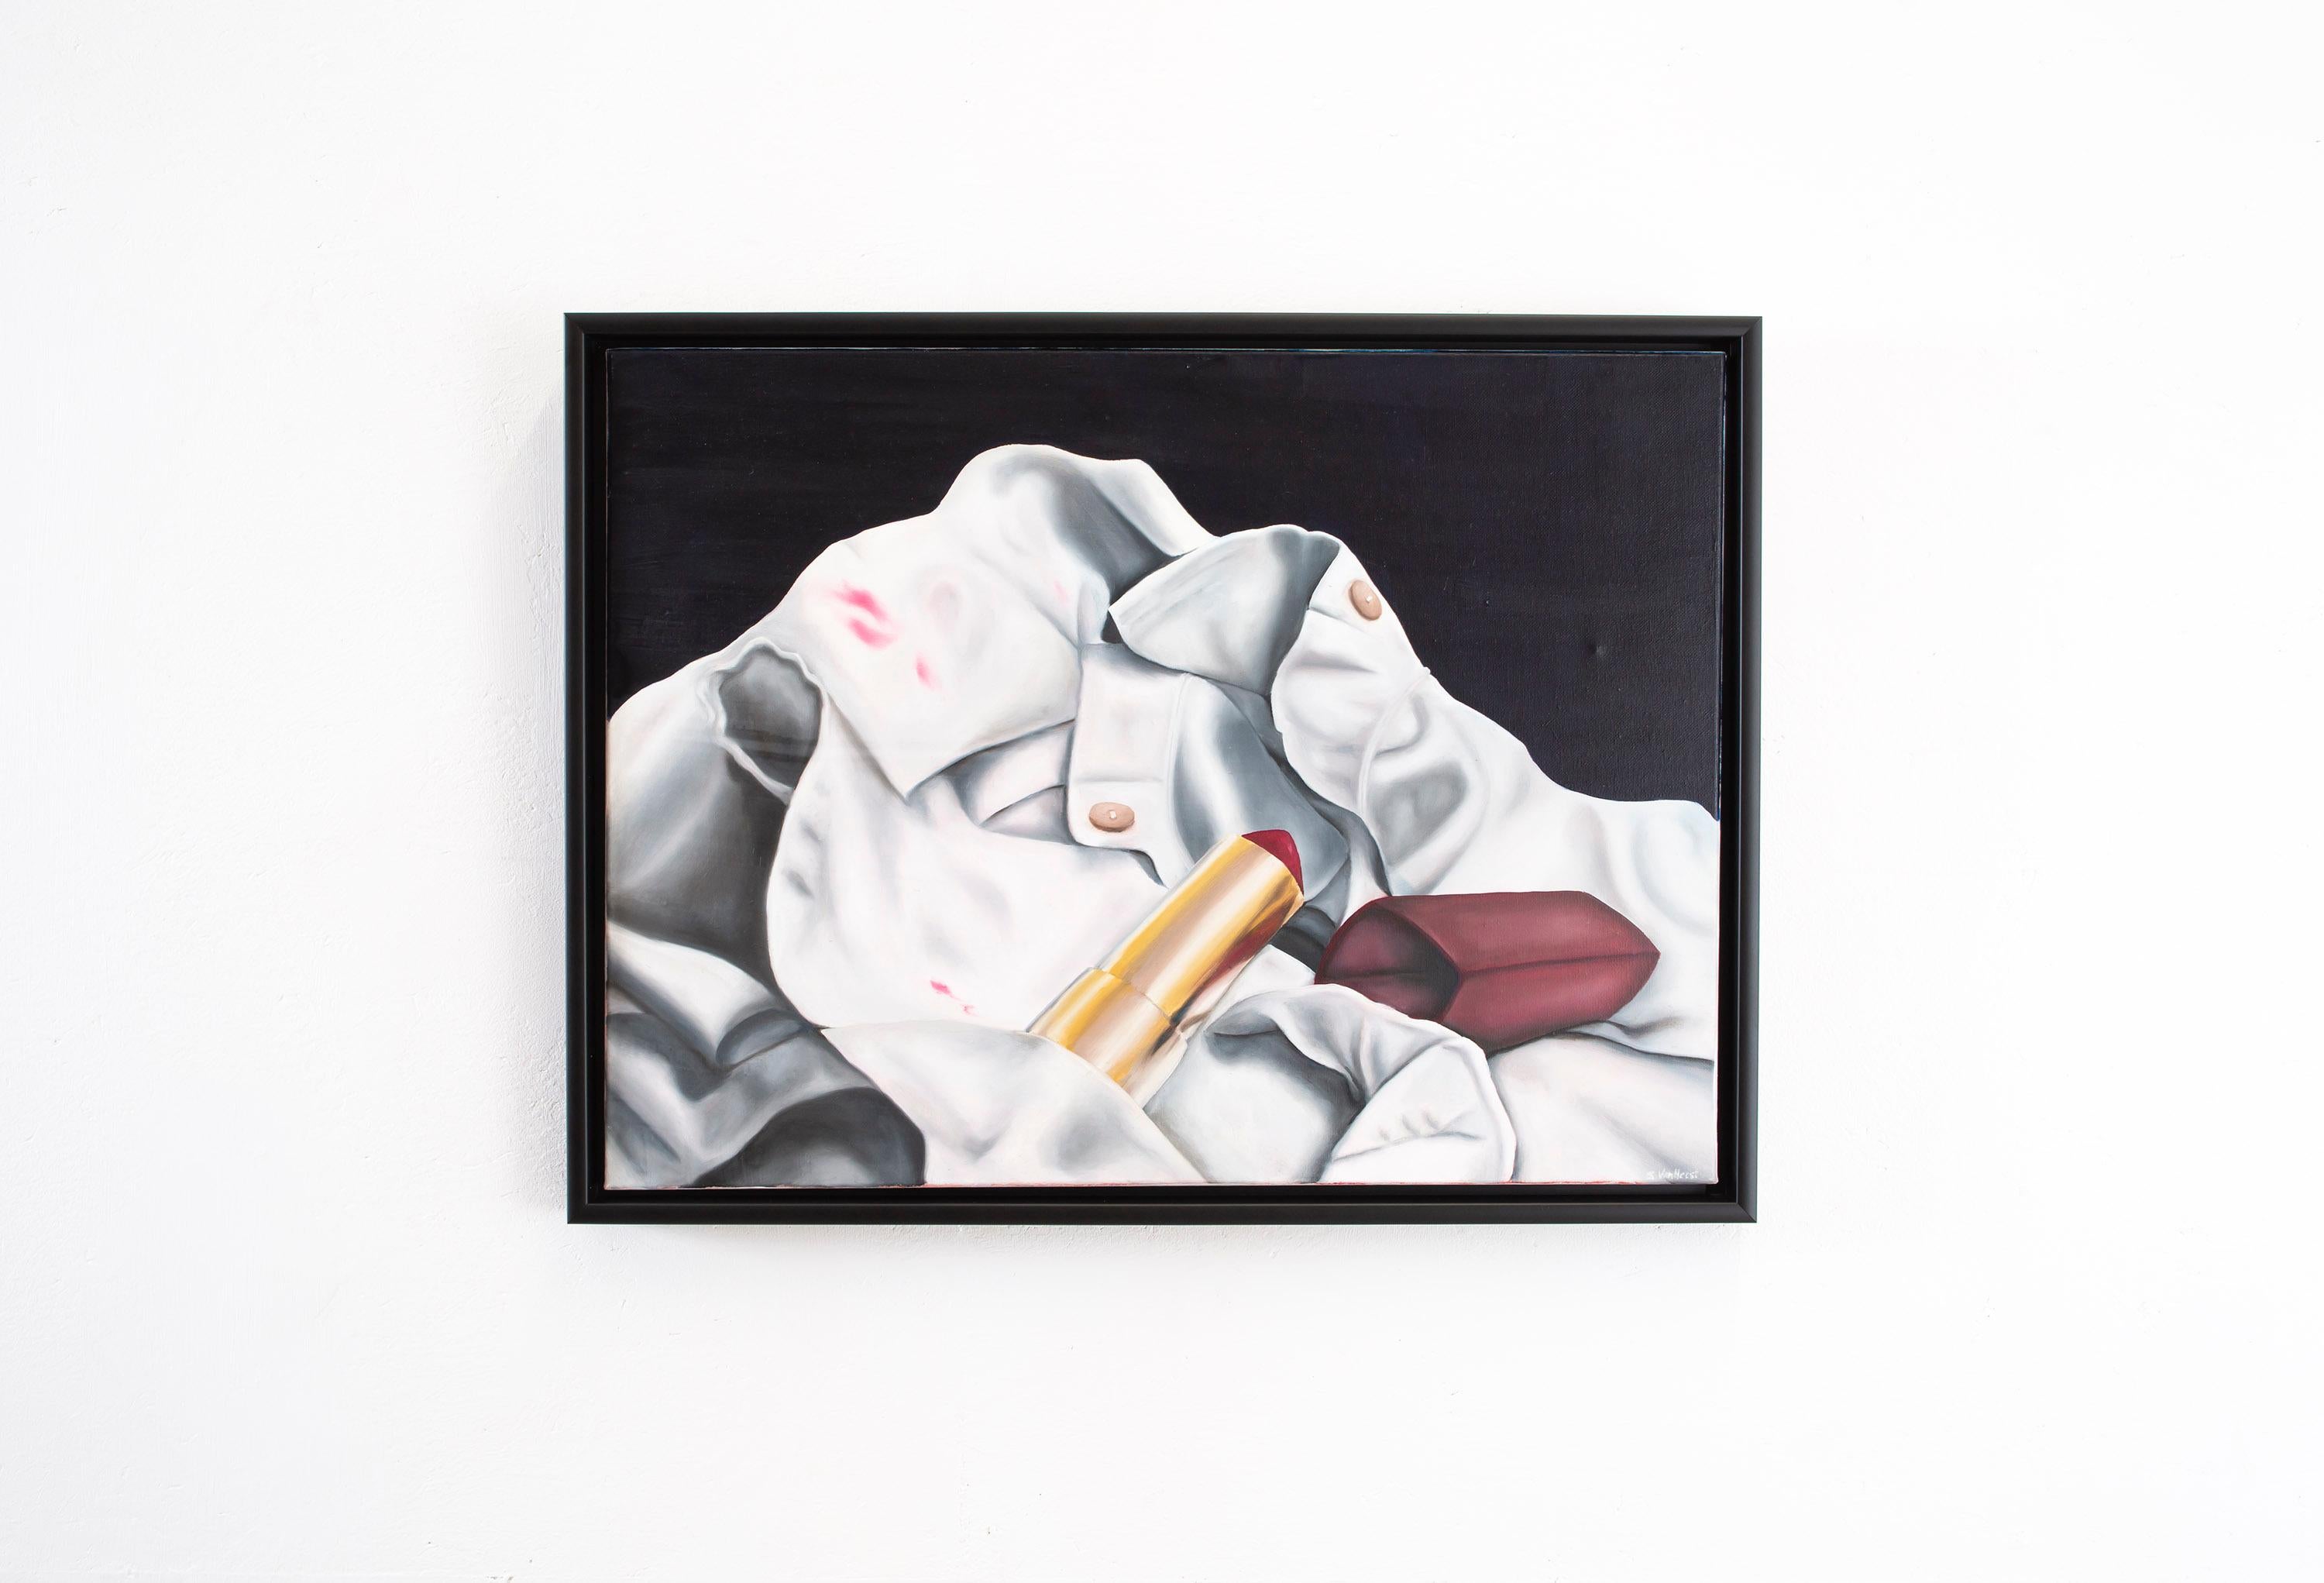 Samantha Van Heest explores the intimacy of impermanence through her work, utilizing still life, found objects, and portraiture through minimalist representation. Her paintings and drawings act as a visual catalogue for her memories, a secure